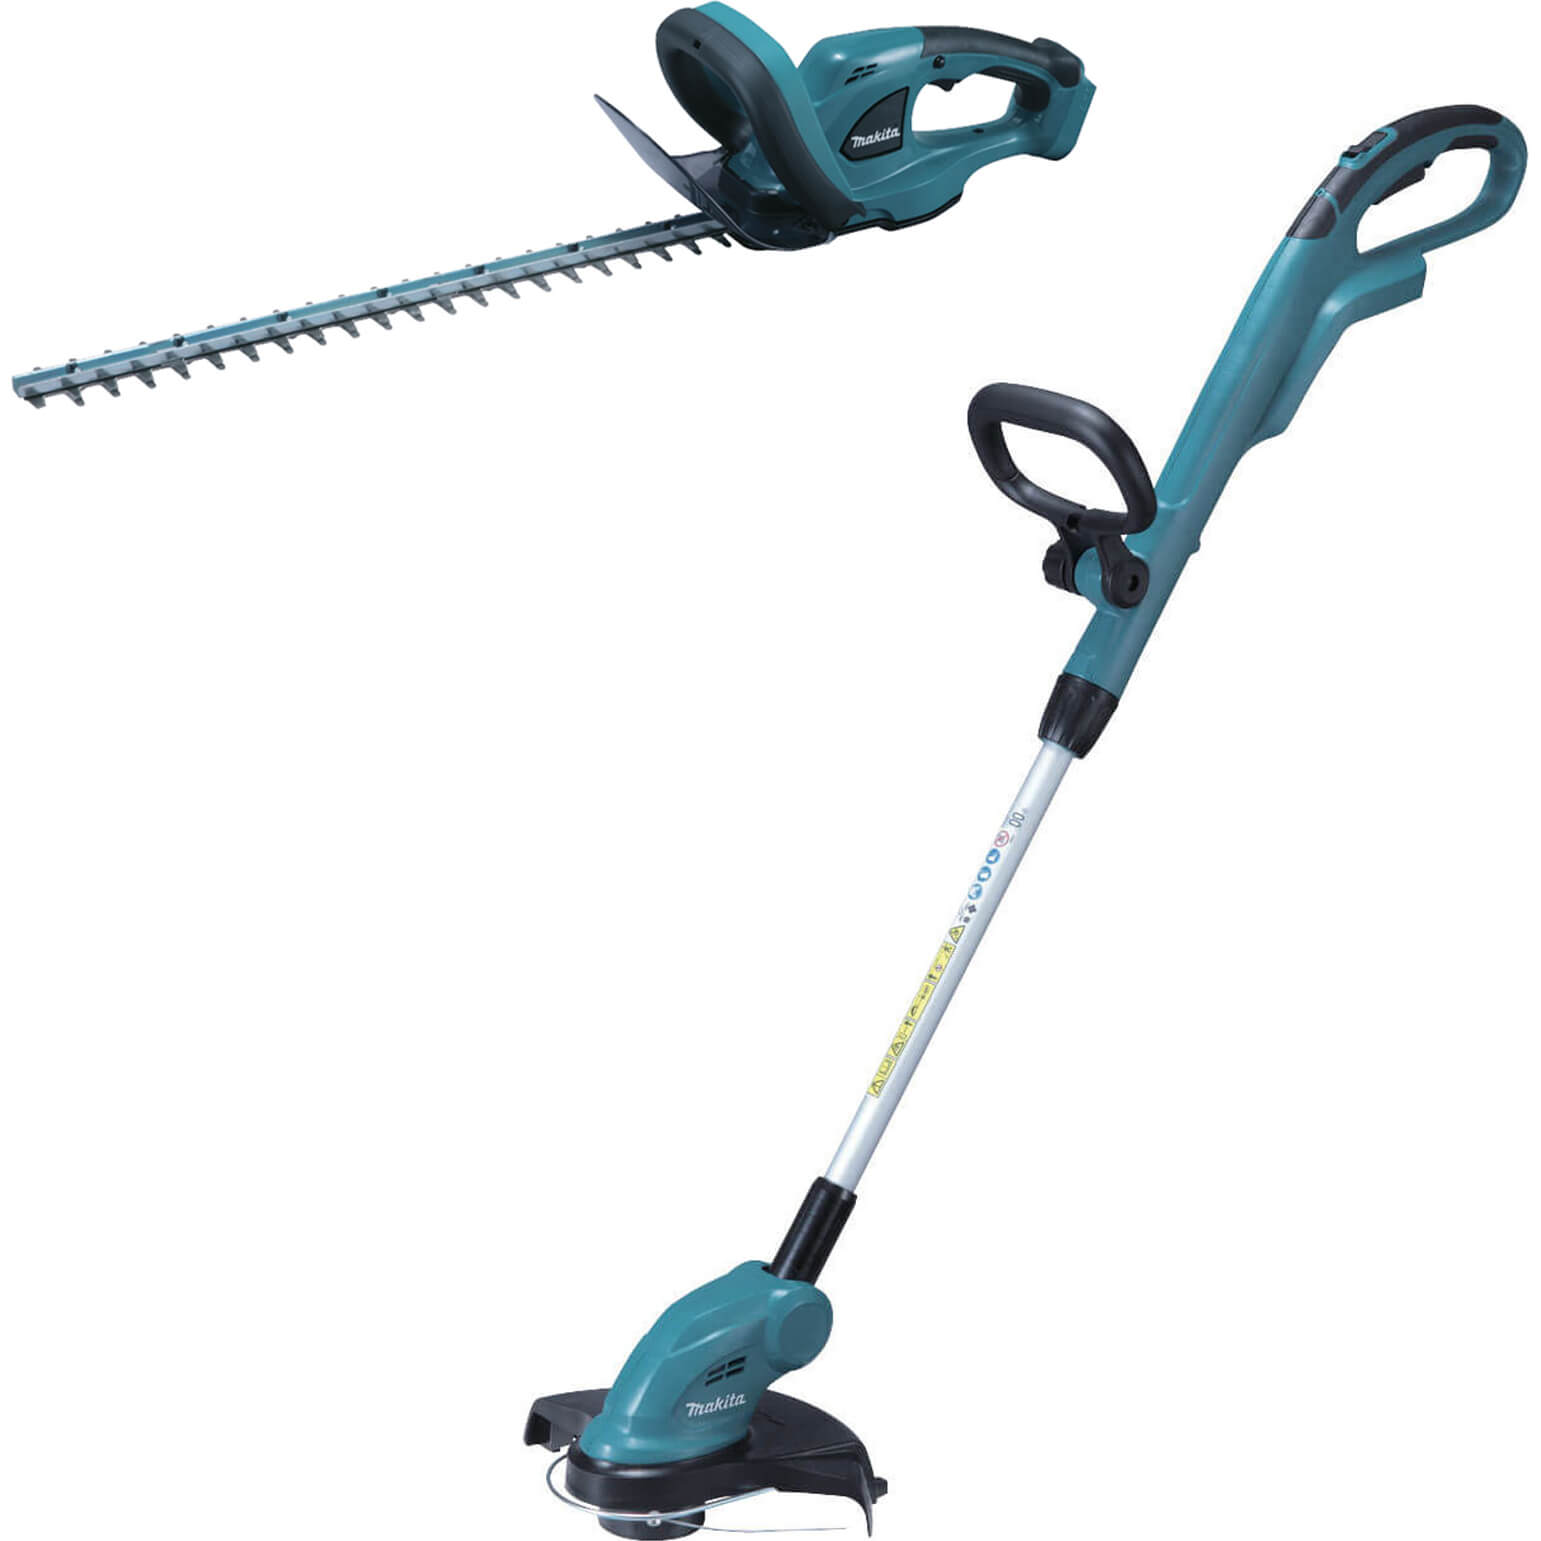 Makita 18v LXT Cordless Grass and Hedge Trimmer Kit No Batteries No Charger